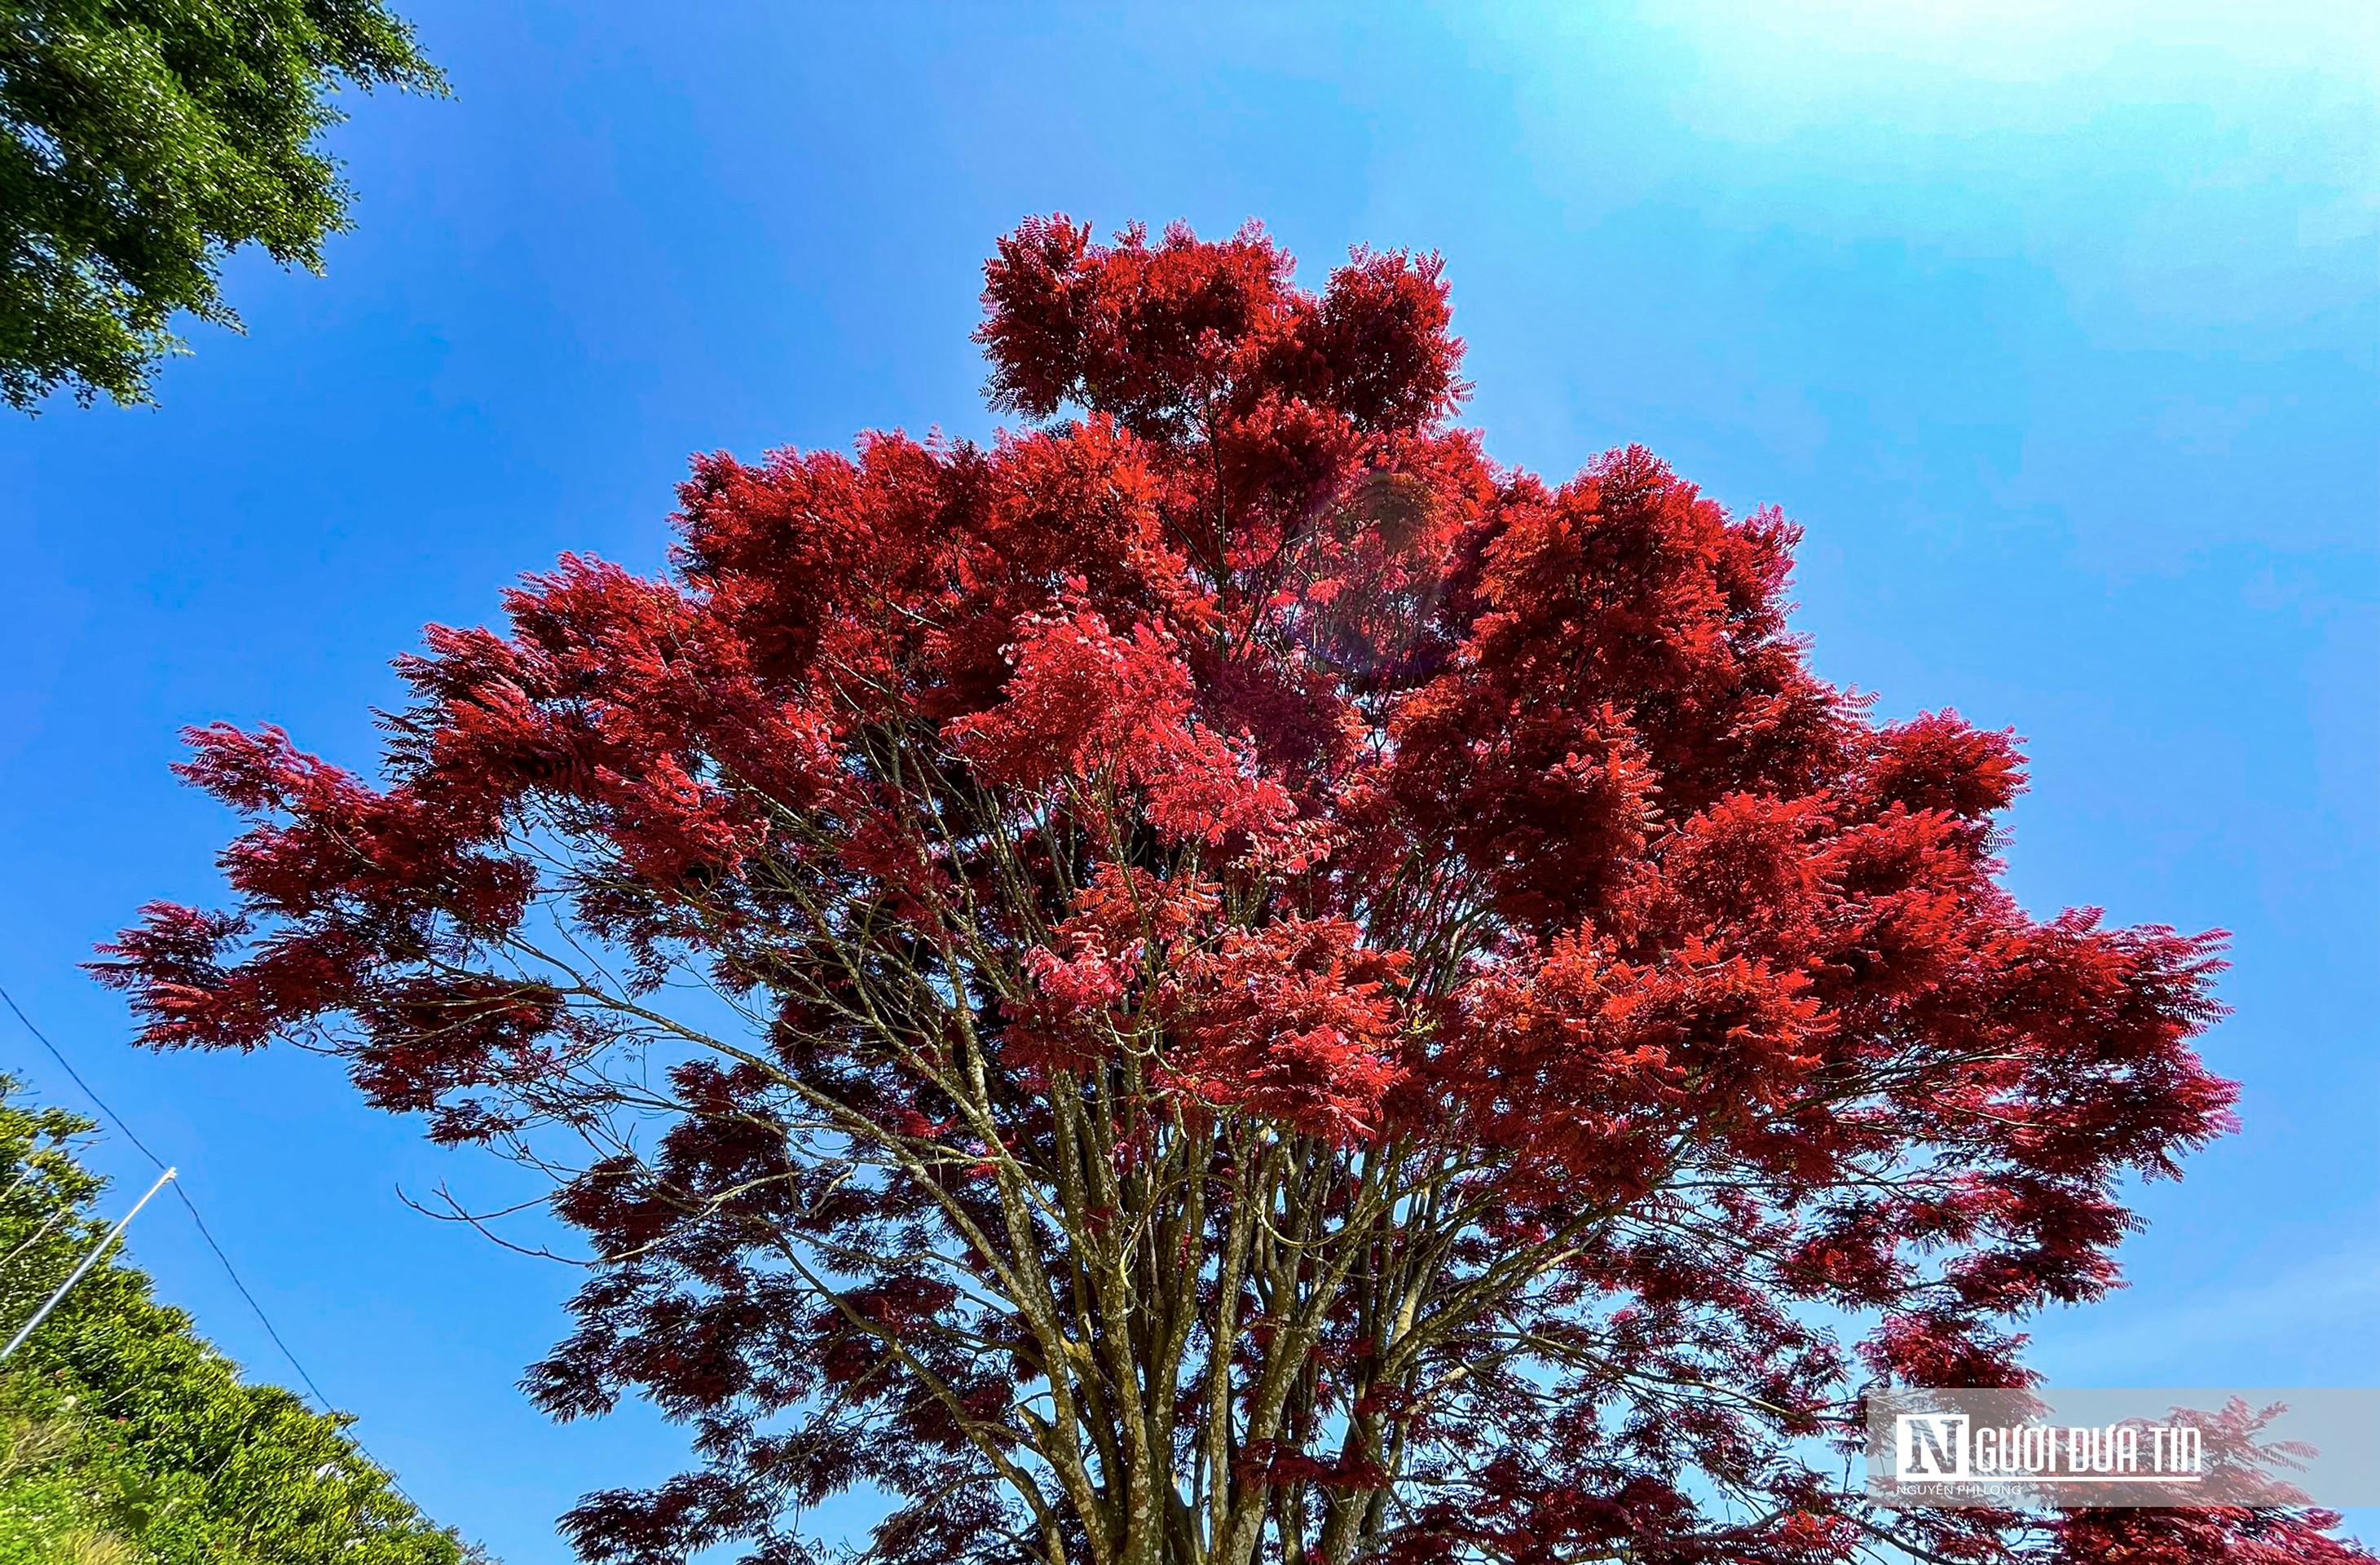 Delighted with the image of the red leaf brooch blooming on the Lam Dong plateau - 13